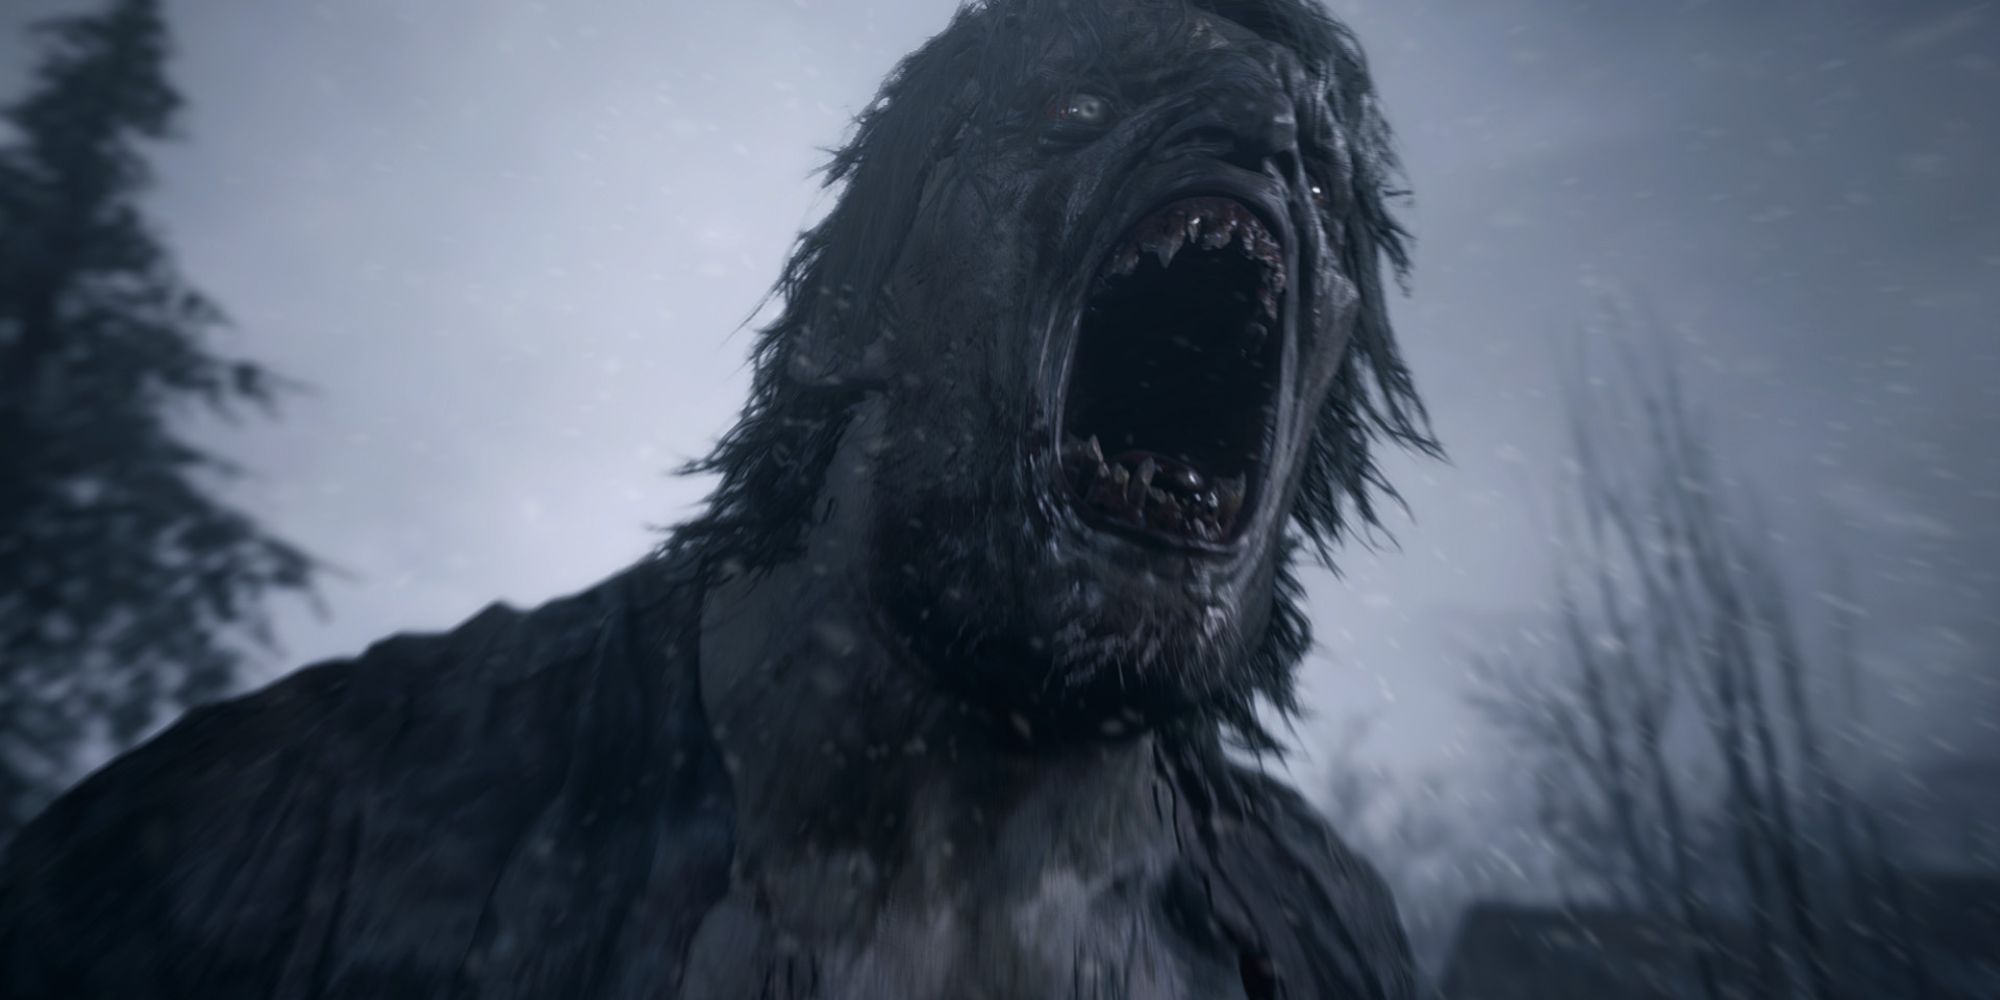 A Lycan roars at the sky during a blizzard in Resident Evil Village.